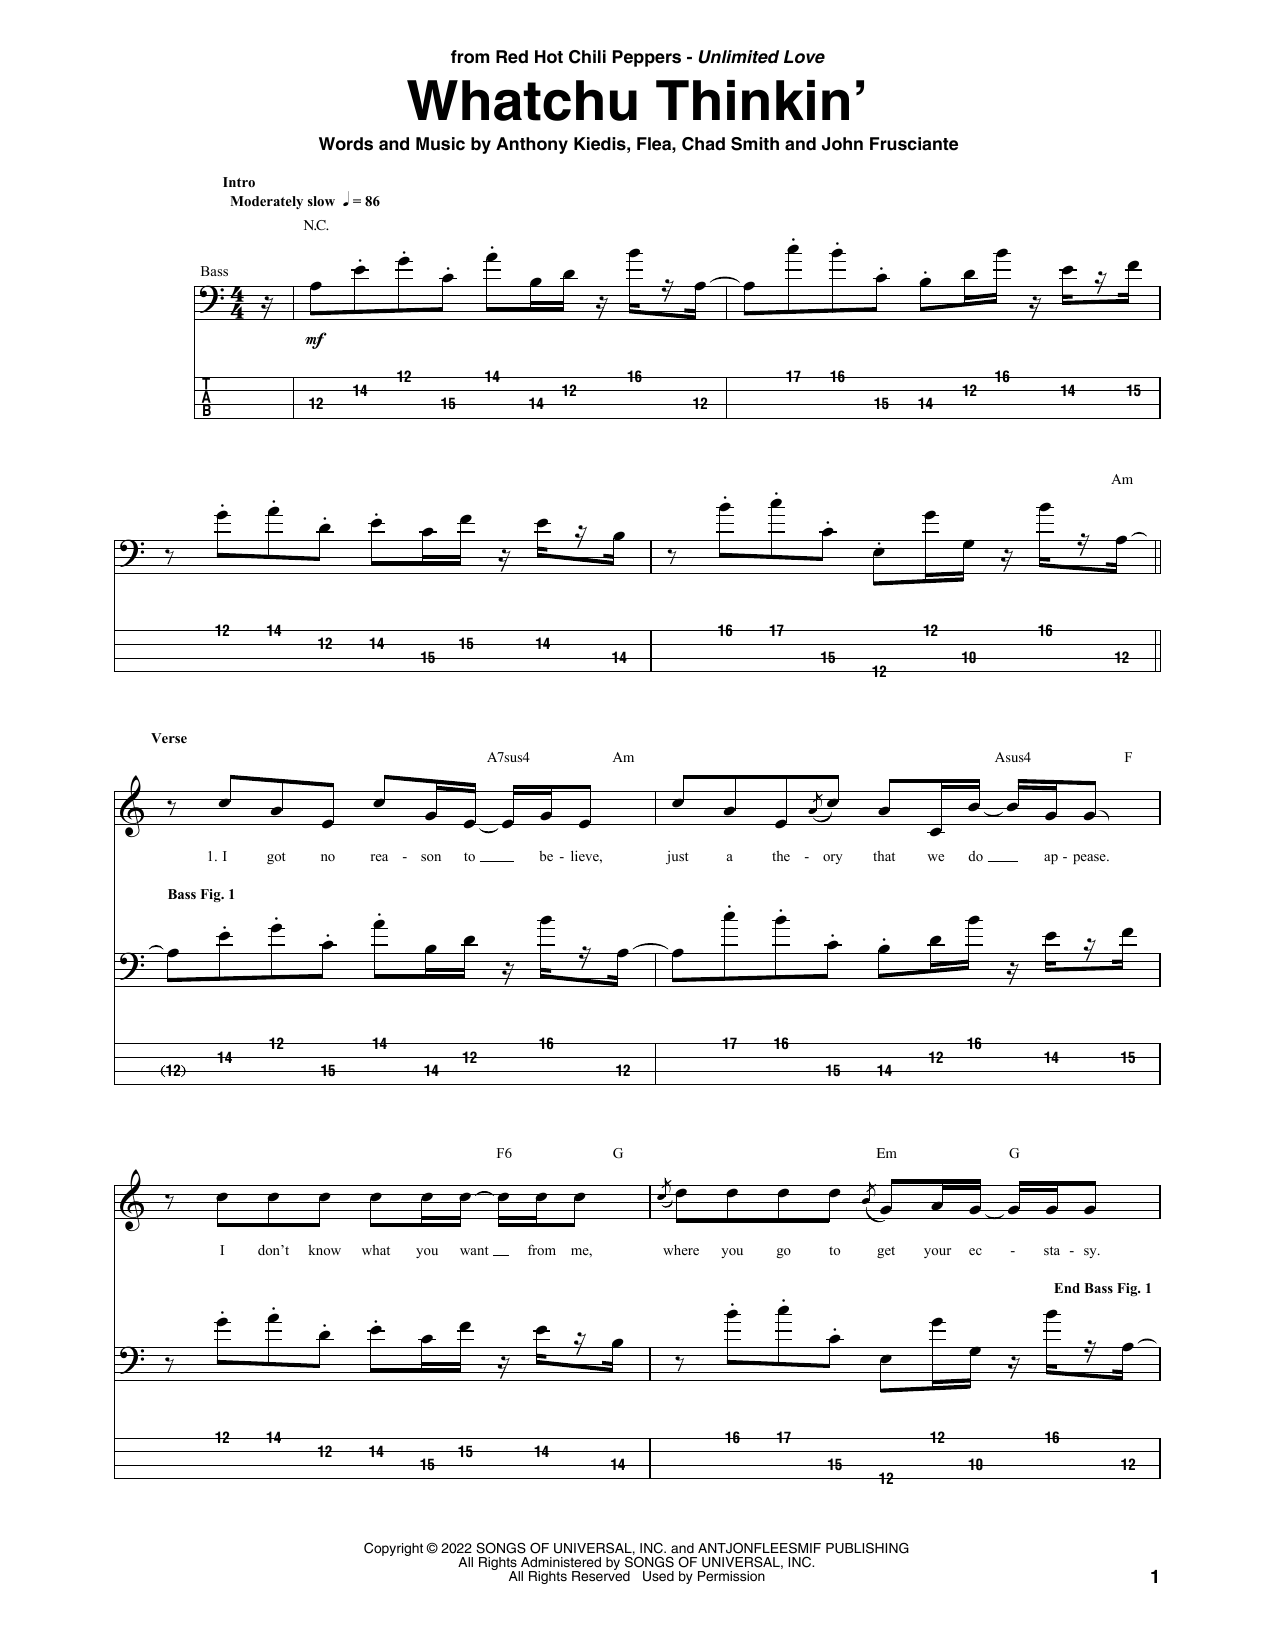 Download Red Hot Chili Peppers Whatchu Thinkin' Sheet Music